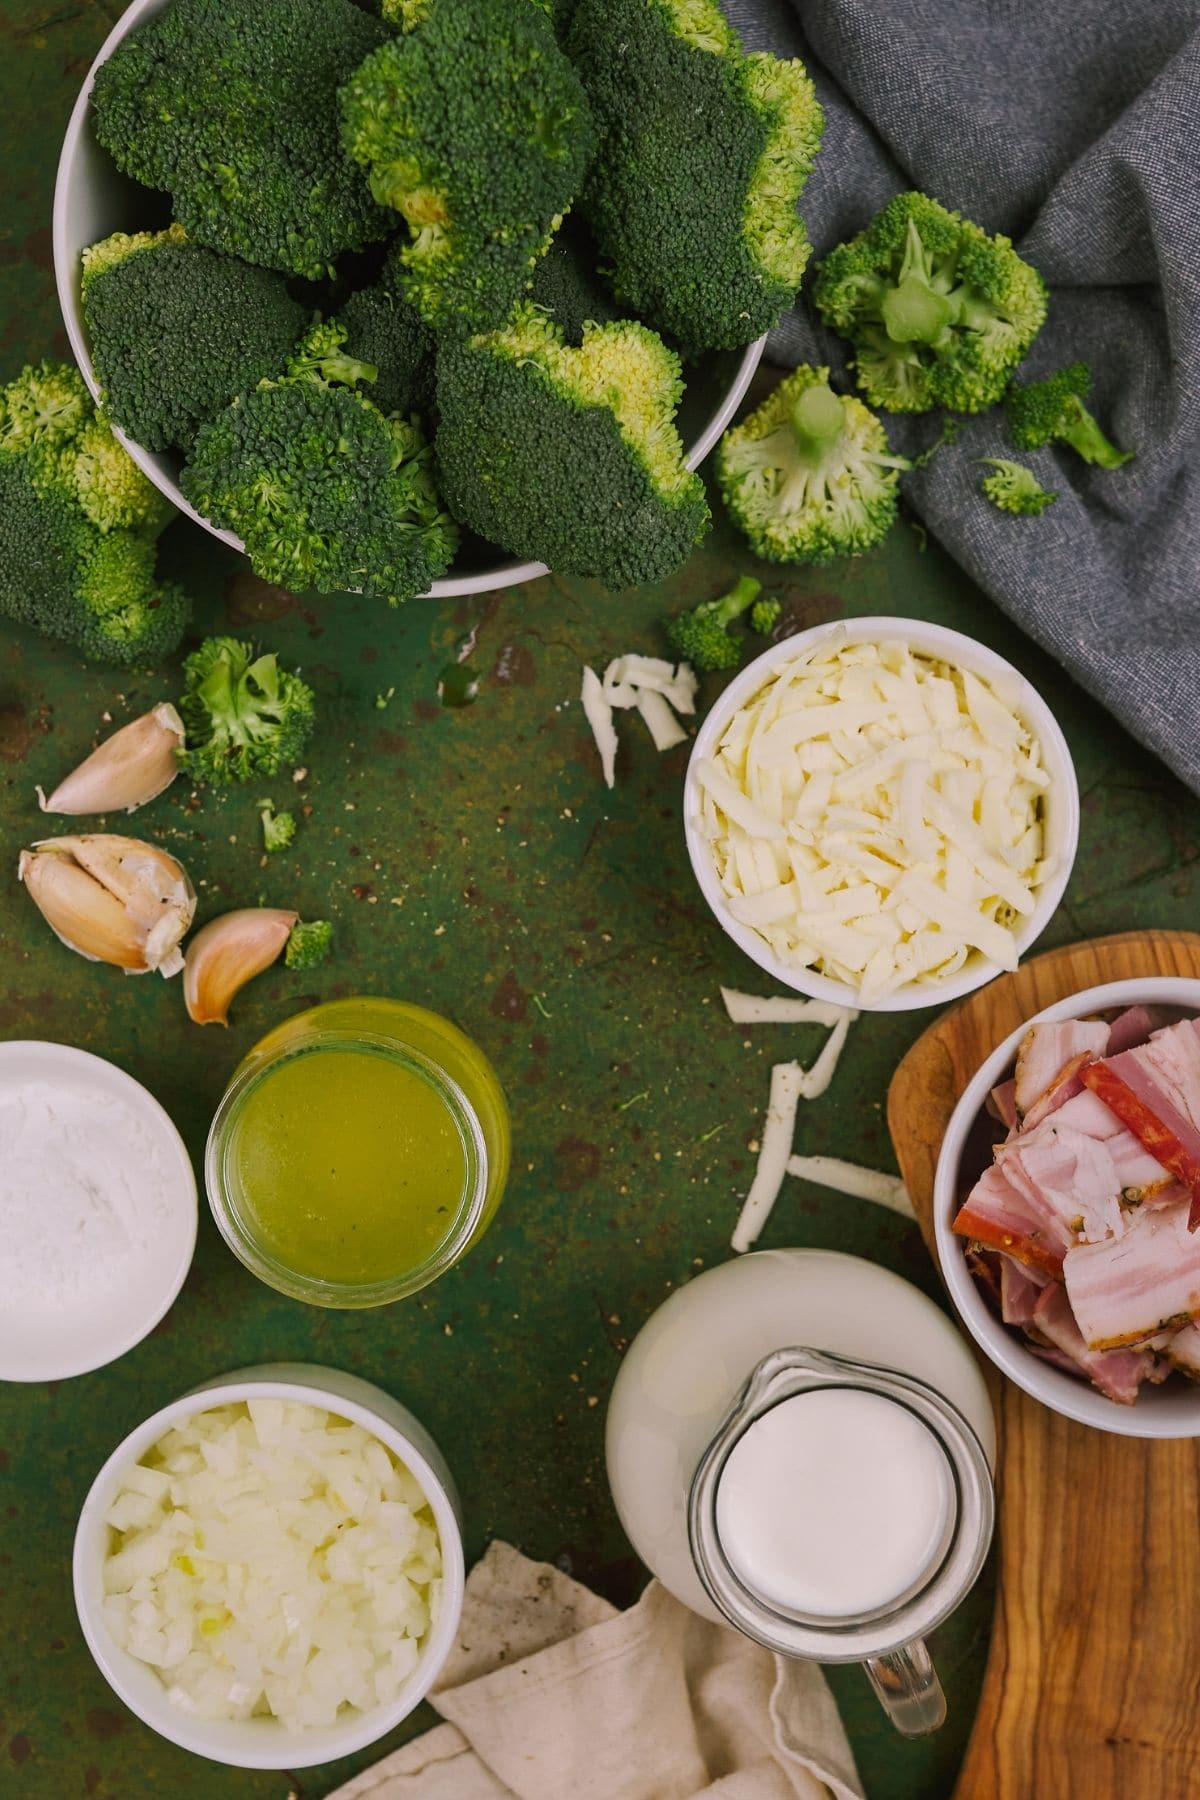 Large bowl of broccoli on green tablecloth next to bowls of cheese cream and bacon